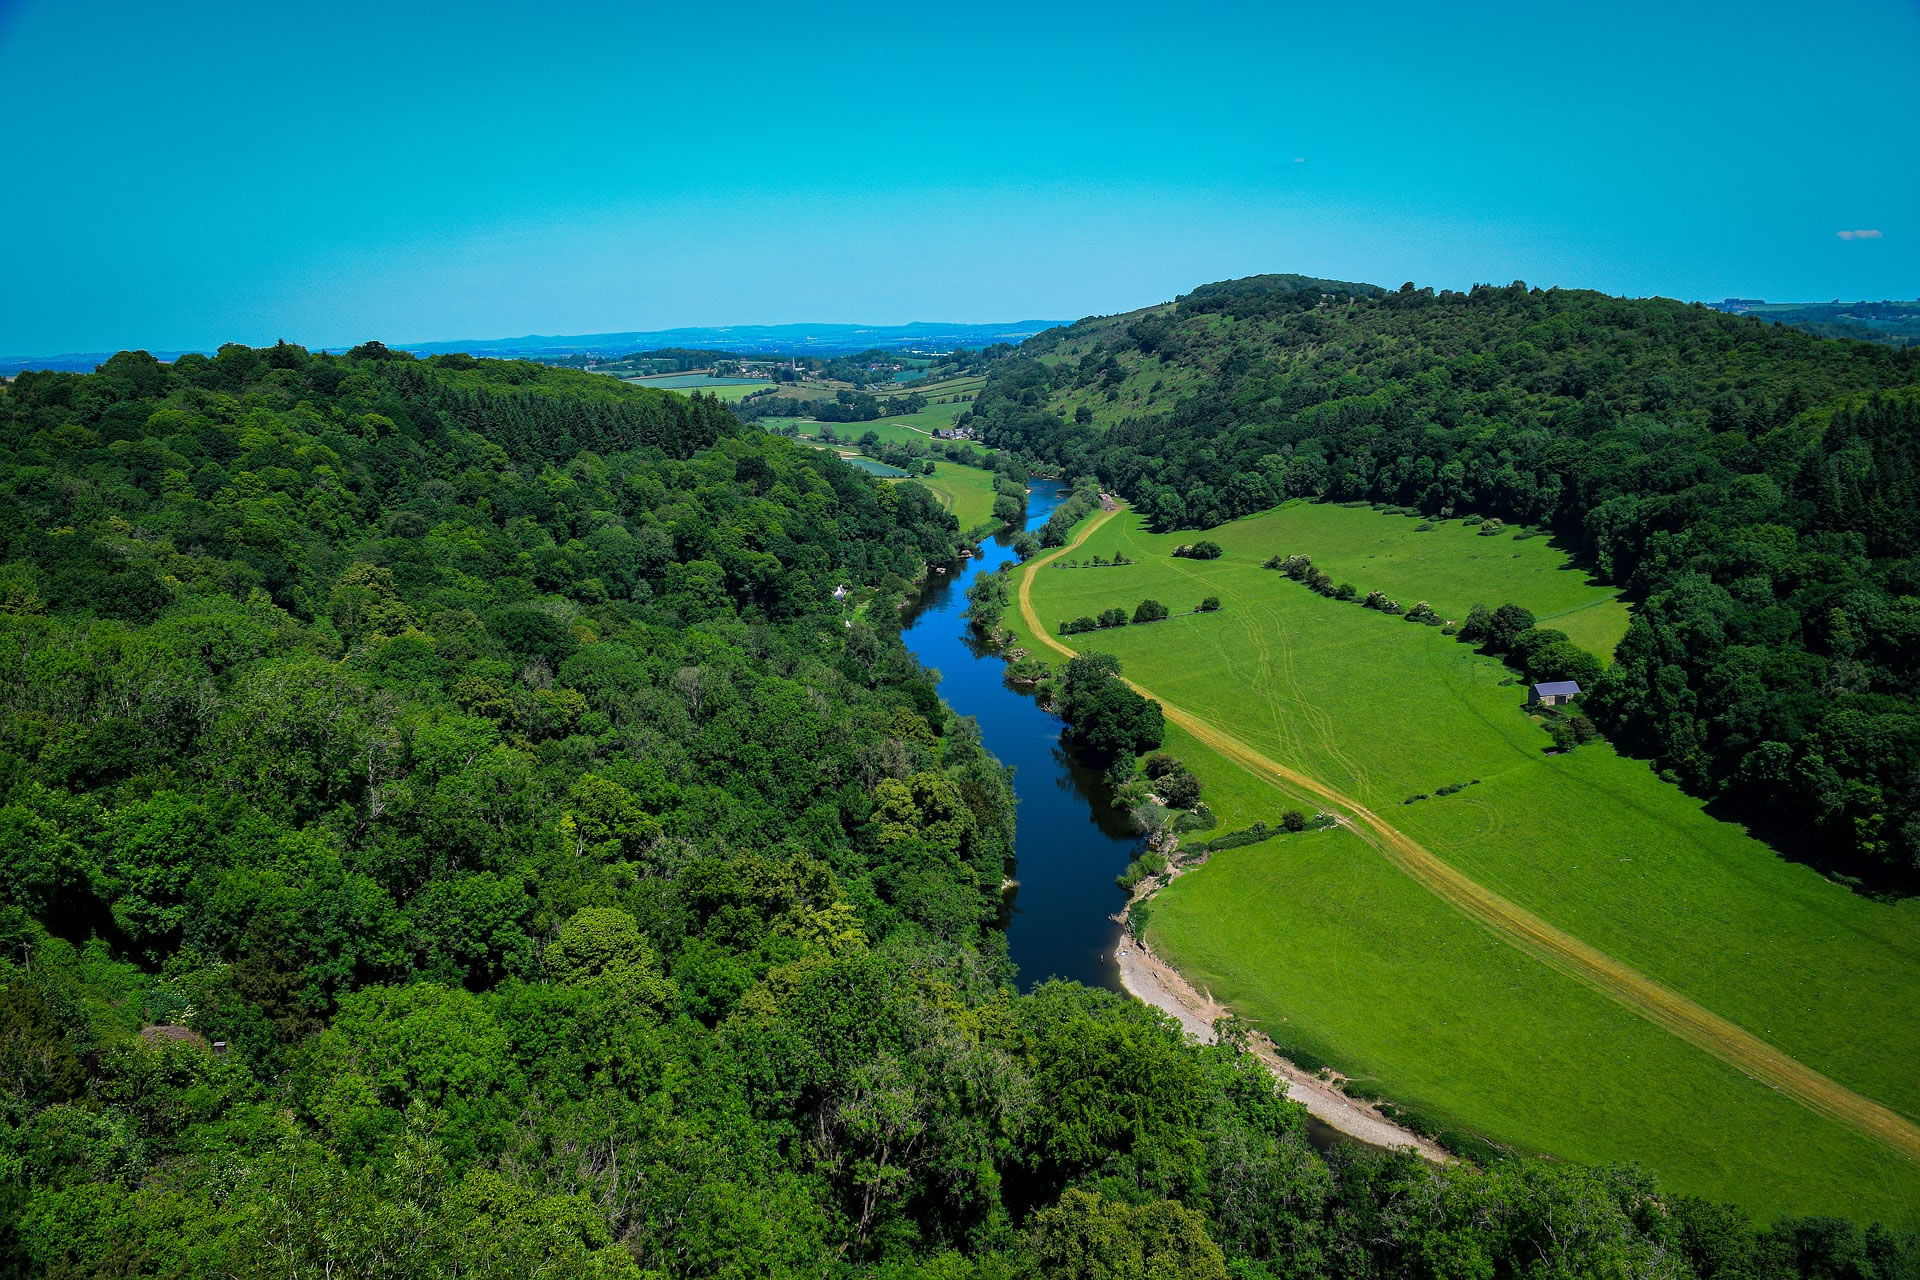 Cycling cafes and cycle rides in Wye Valley